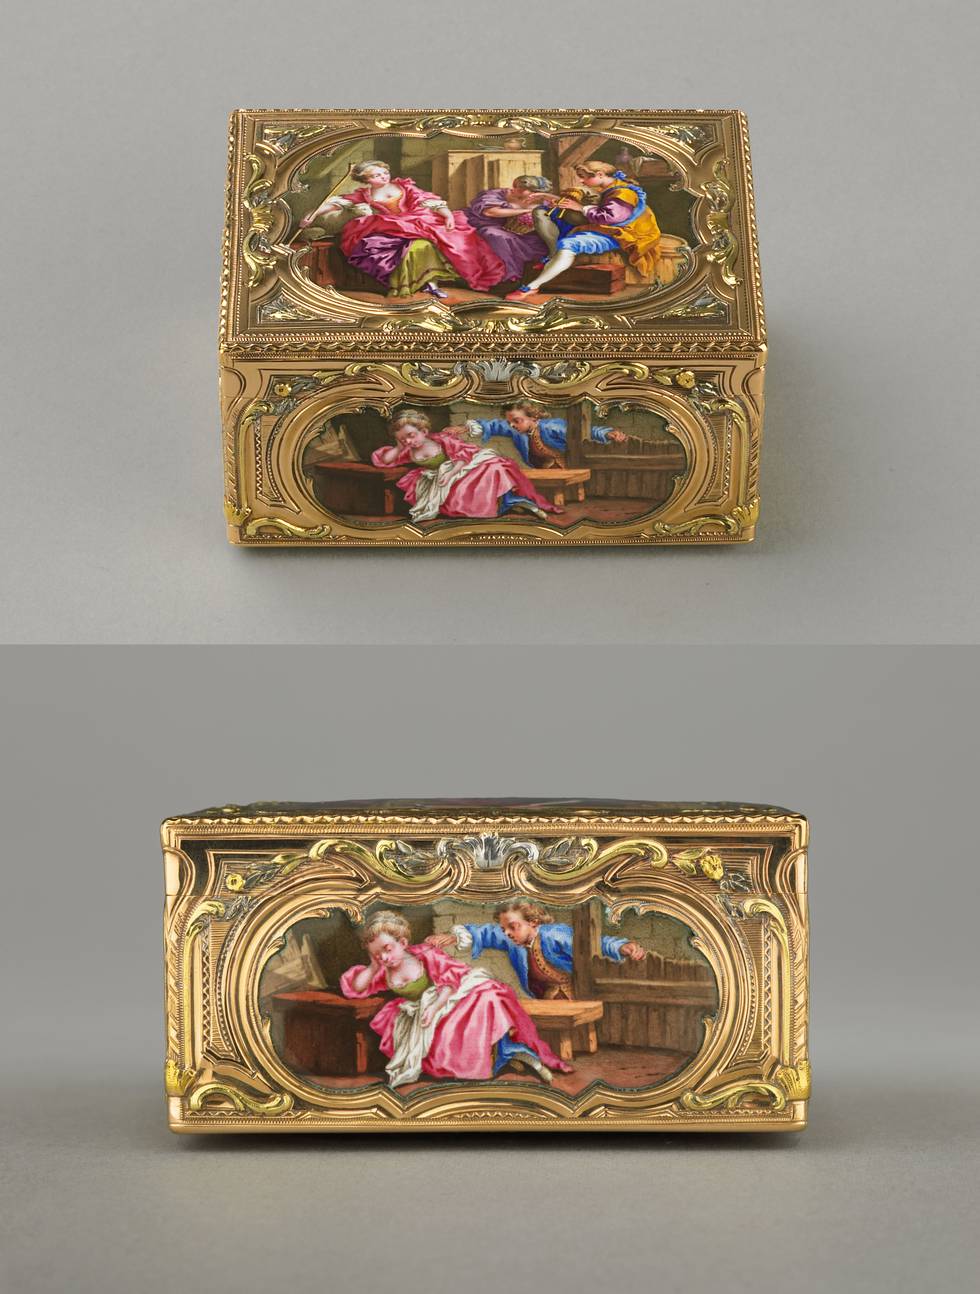 Gold and enamel box, images of a shepherdess on all sides.